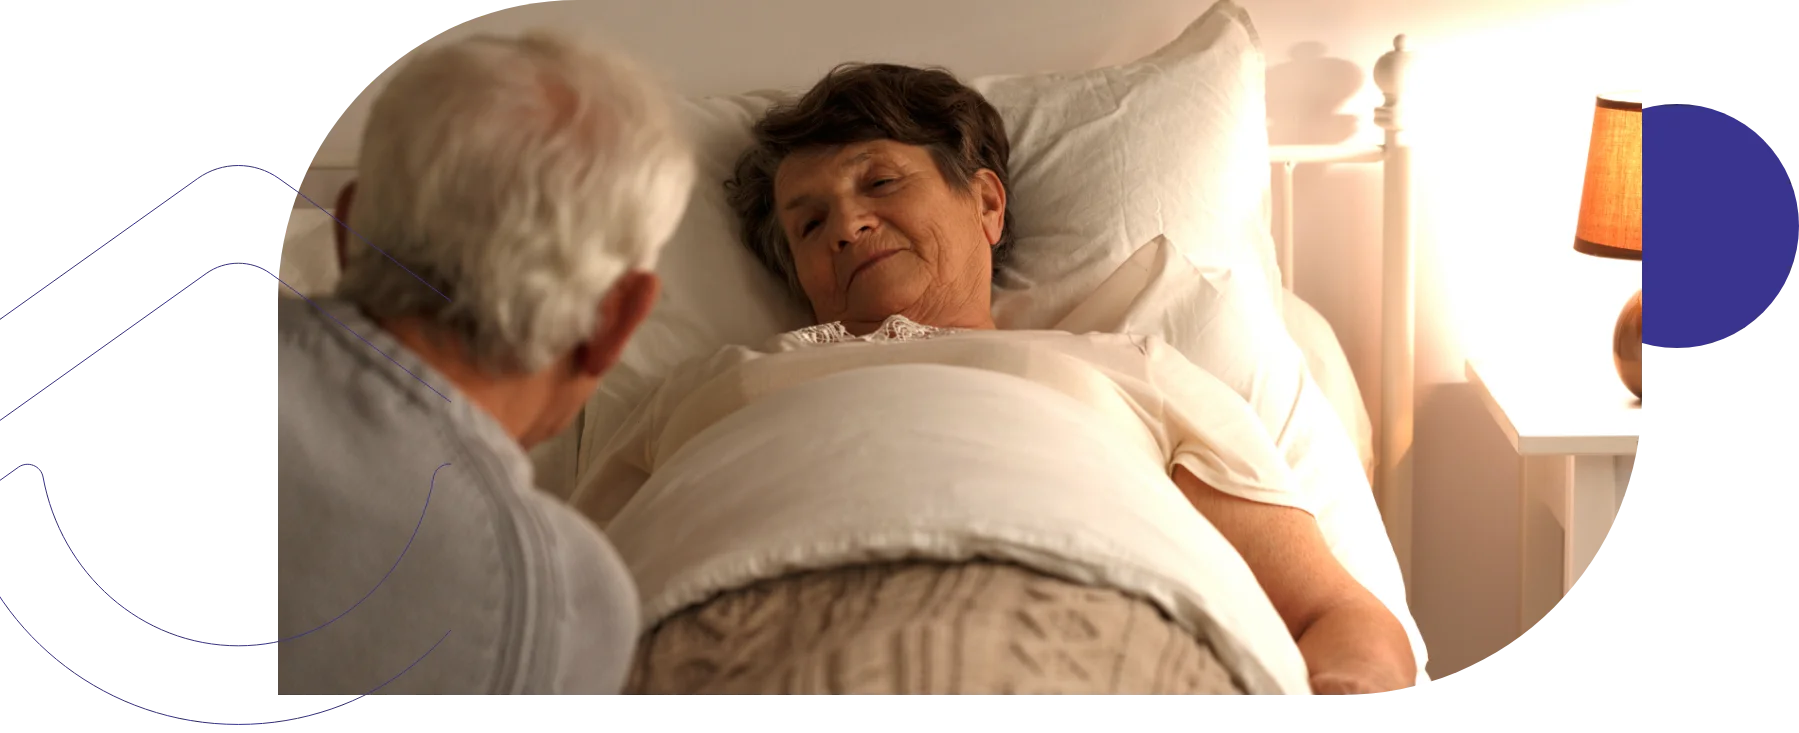 A senior woman lies in bed while an elderly man sits beside her, offering comfort or company.